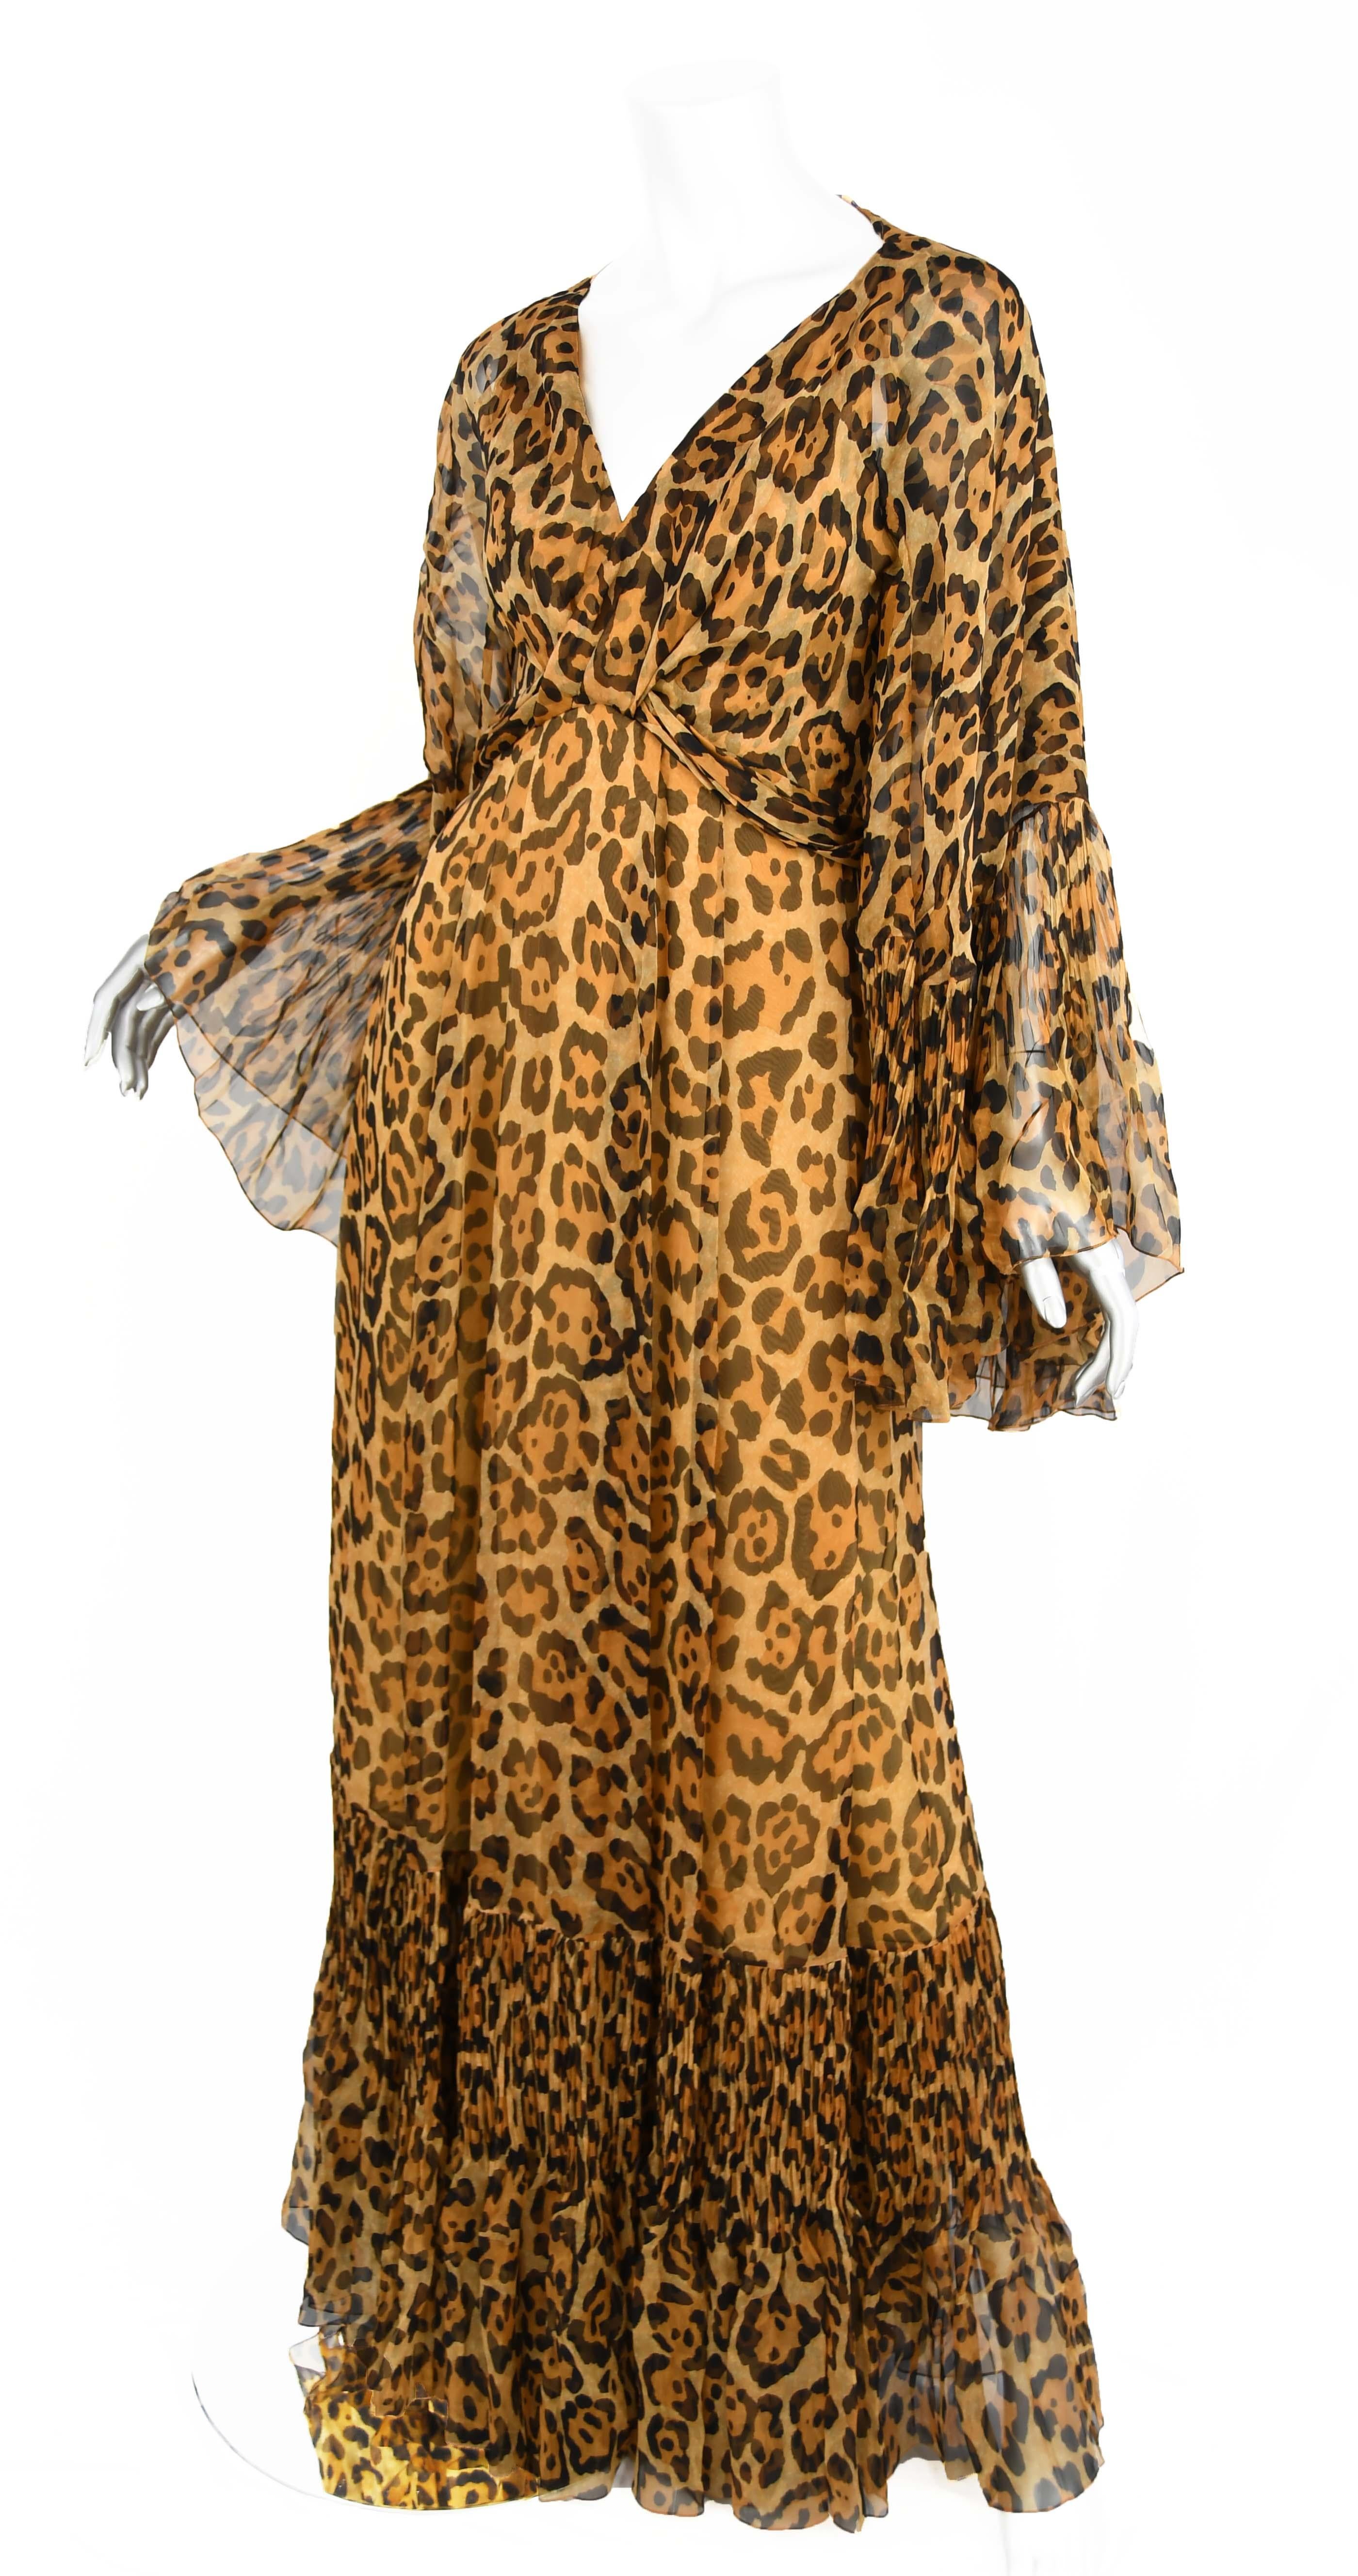 Make a statement in this elegant Christian Dior leopard gown, made of stunning silk chiffon.  Attached cape with pleated ruffles. Beautiful covered button detail down the back.  From Resort '09 collection, Demi Lovato recently wore this to the 2018